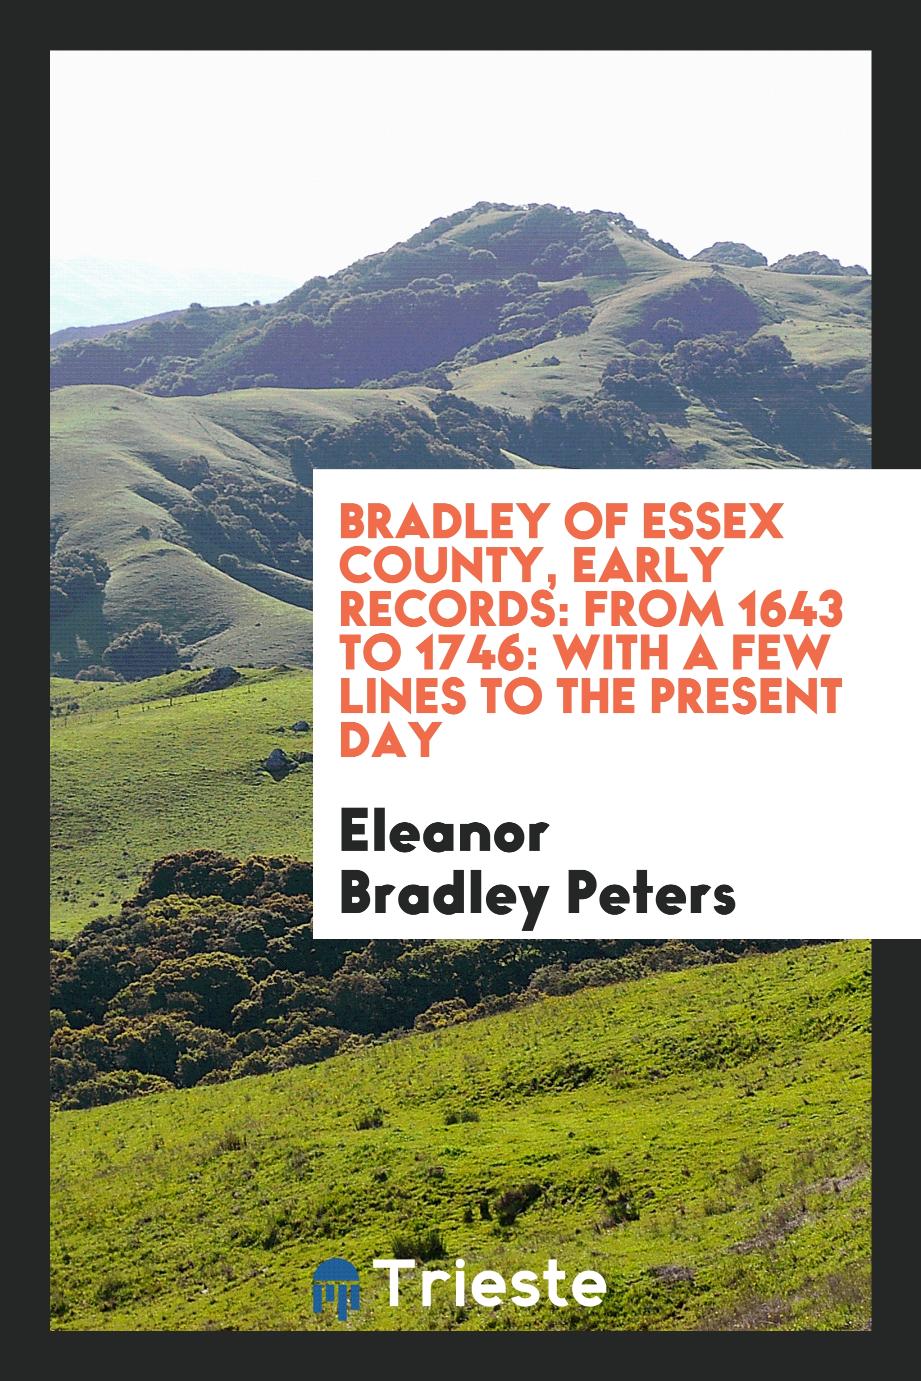 Bradley of Essex County, early records: from 1643 to 1746: with a few lines to the present day